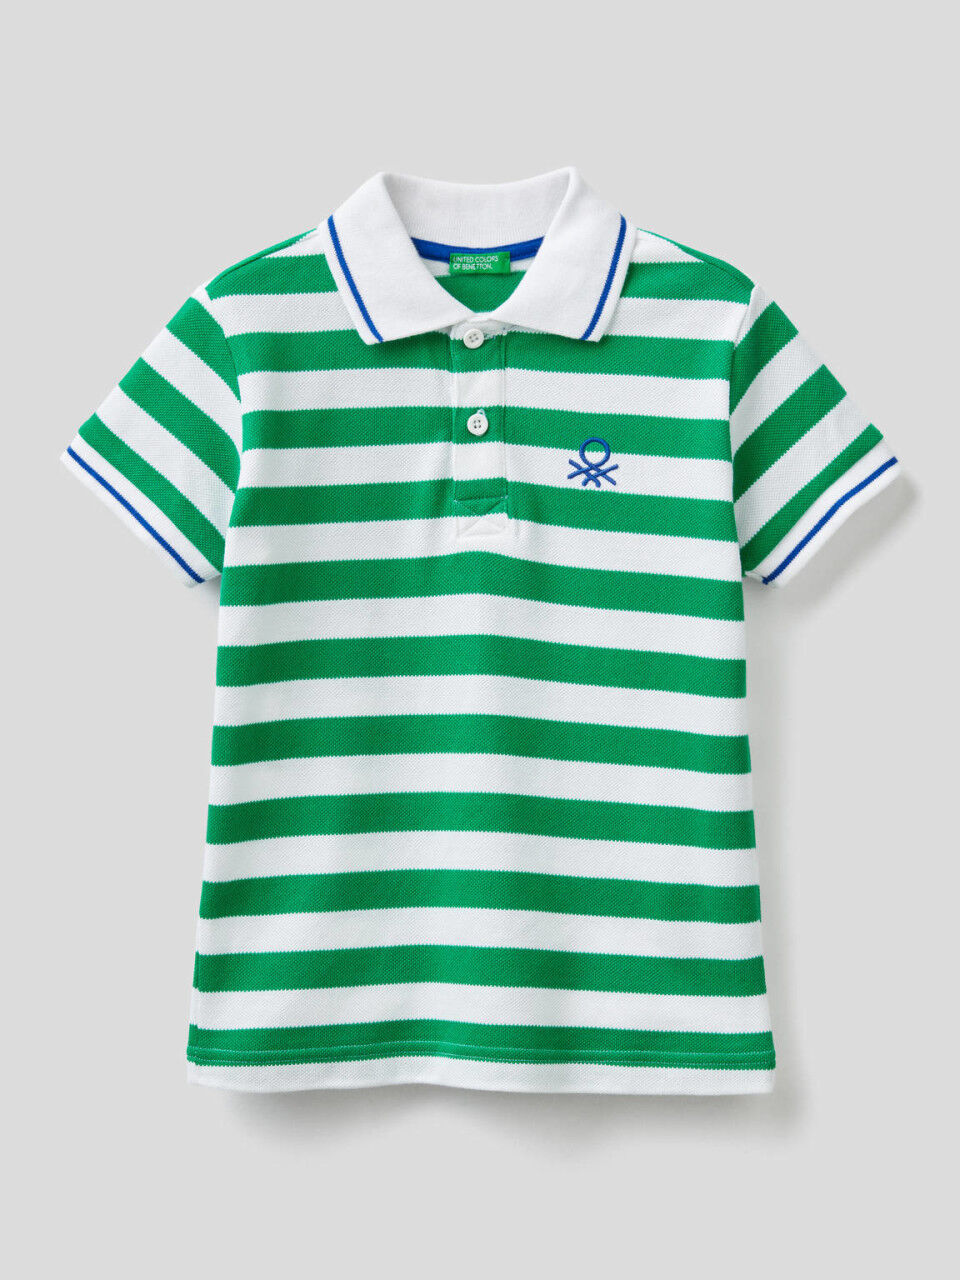 Stripes Mania Junior Boy 4 14 Years Old Collection 2021 Benetton